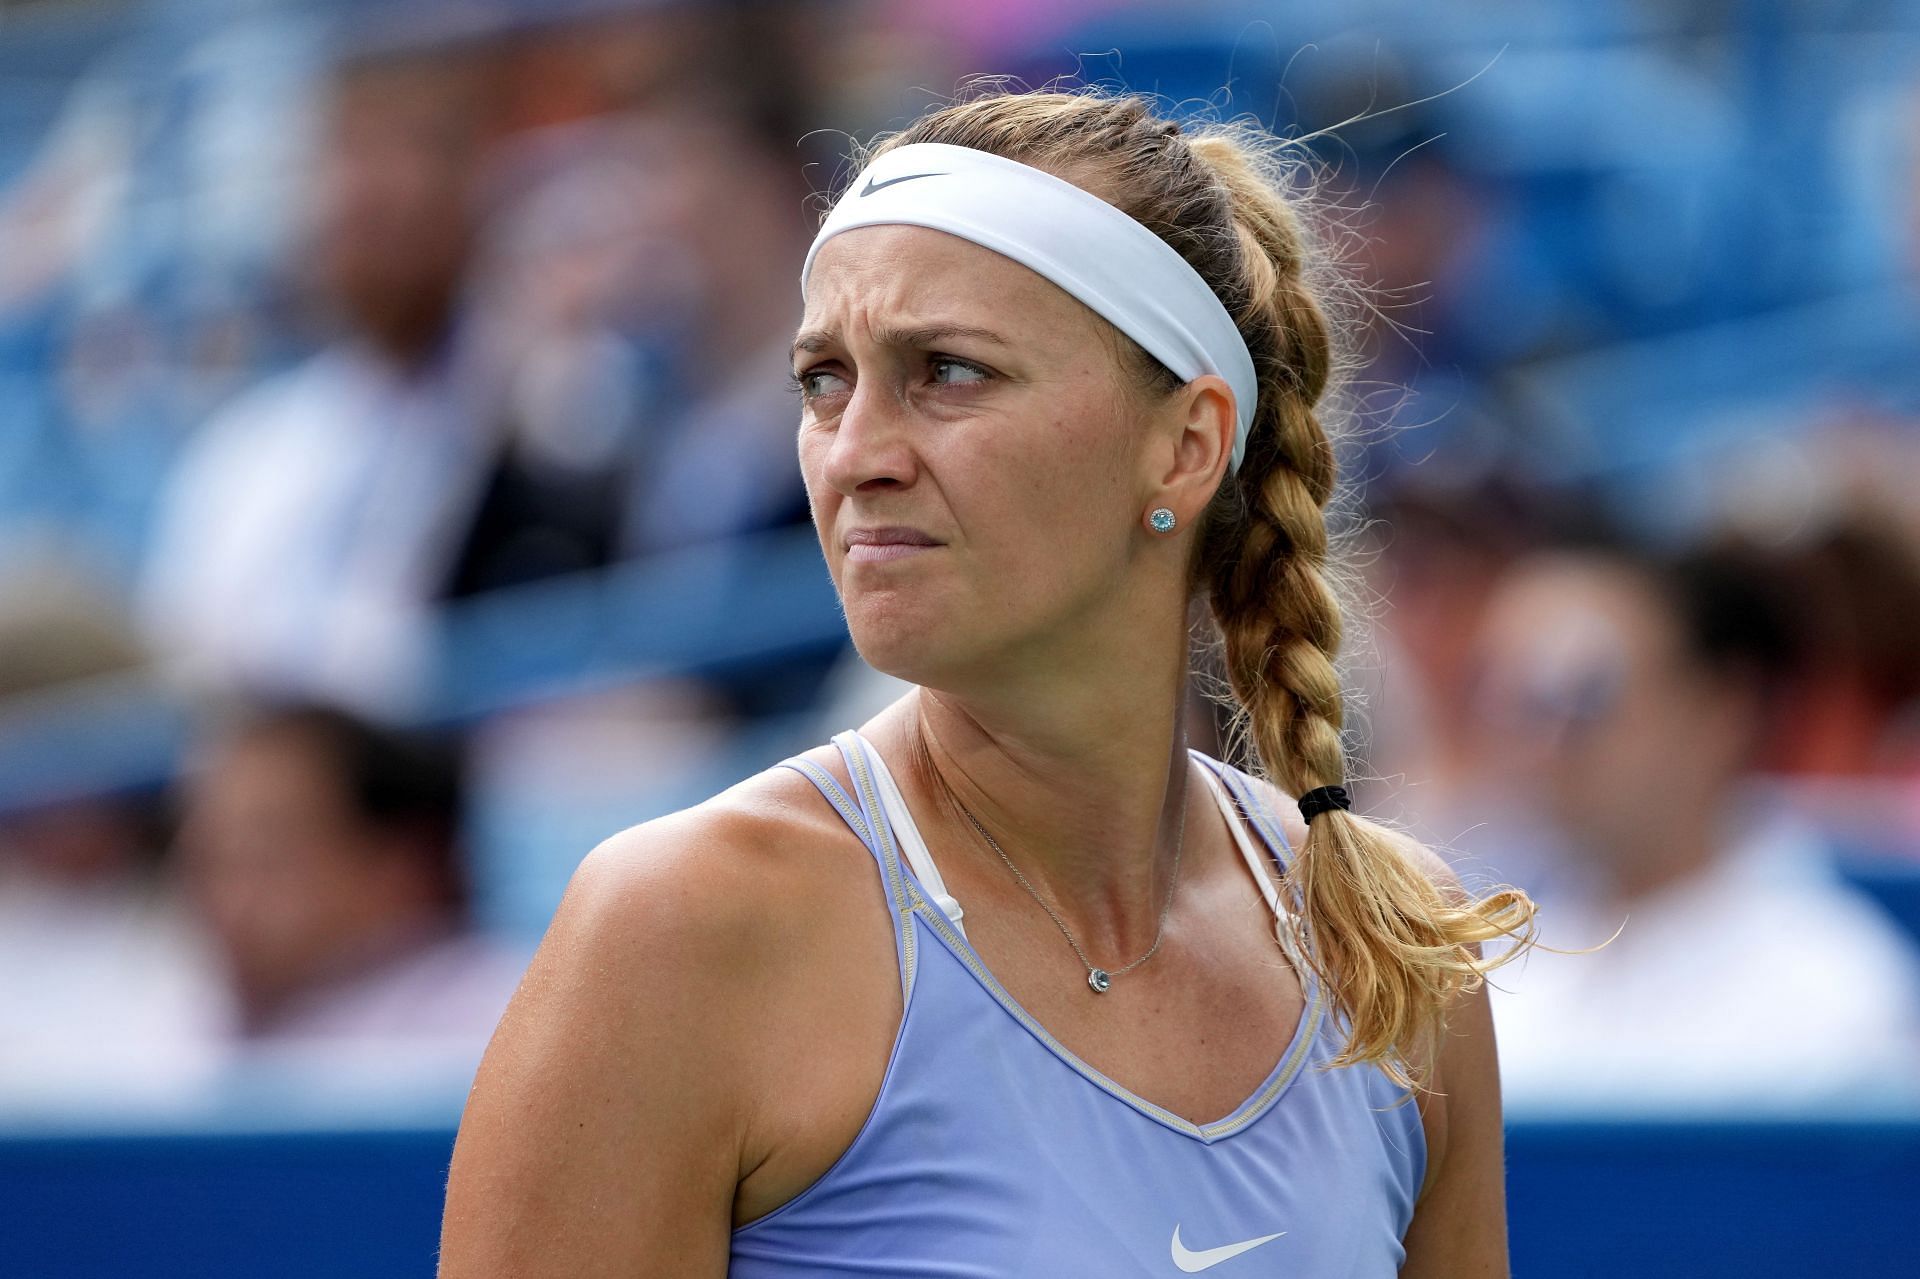 Kvitova&#039;s prospects will depend a lot on her serving numbers.